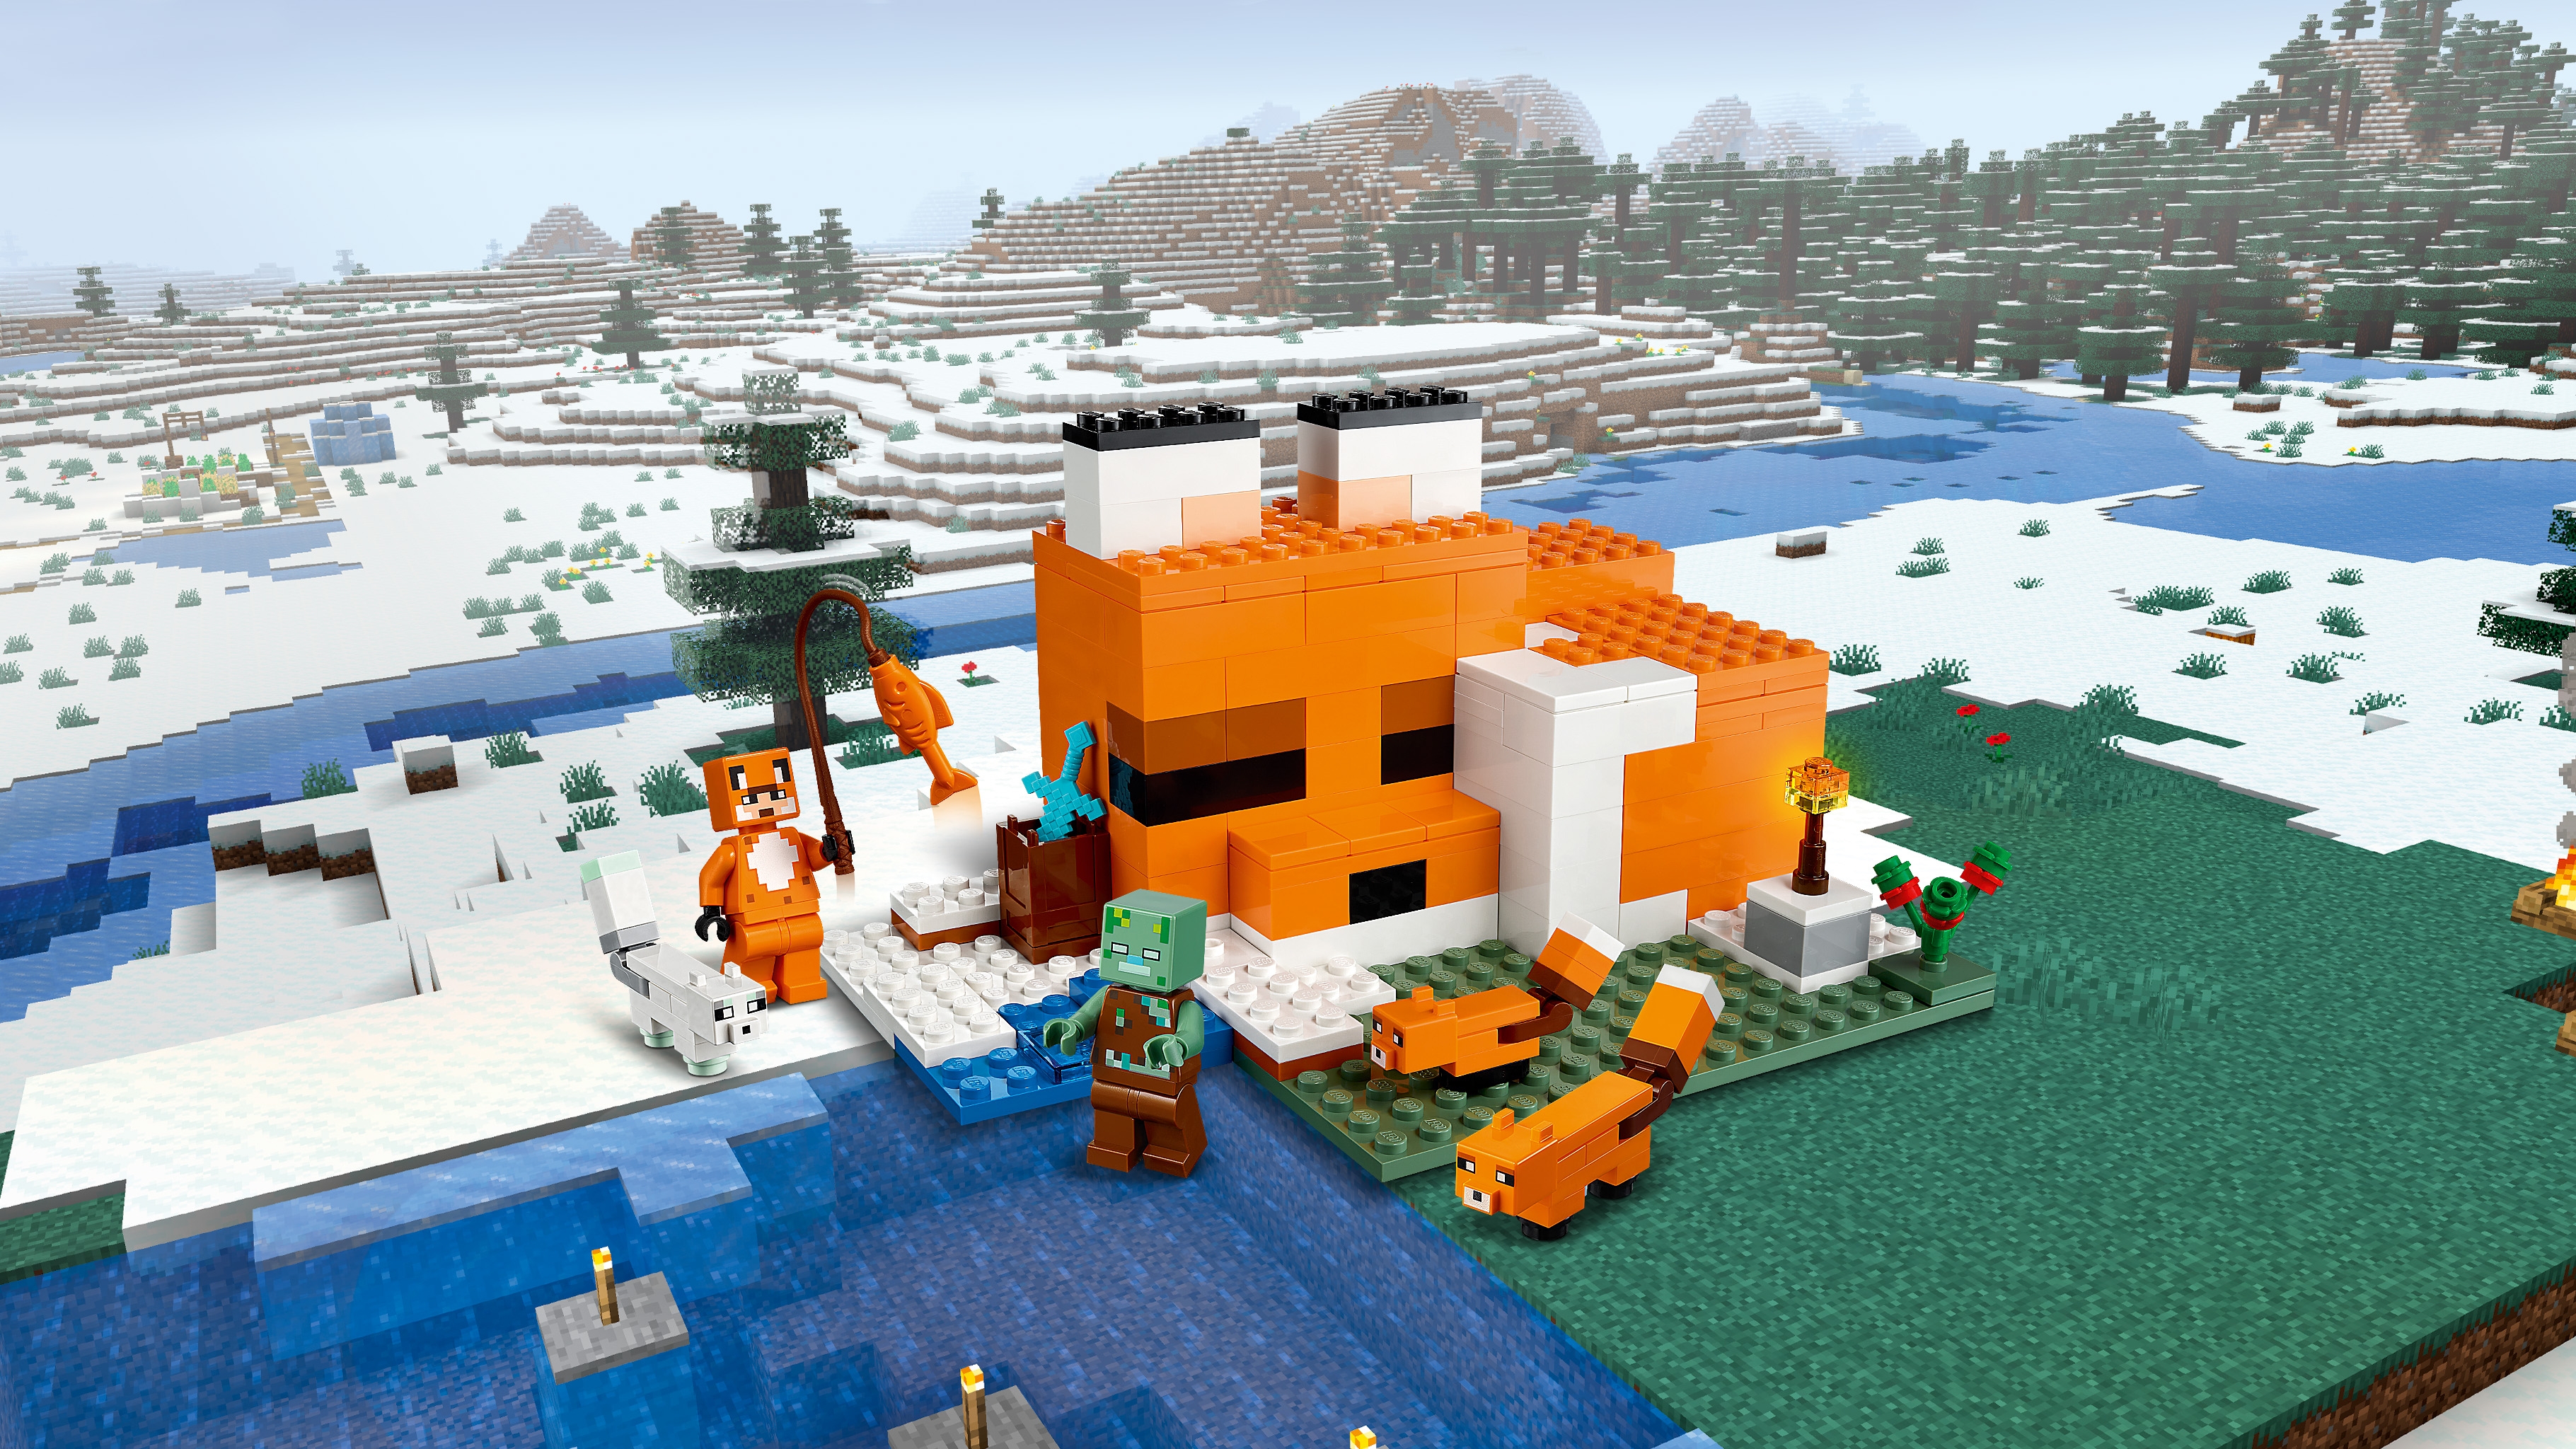 The End Portal 21124 - LEGO® Minecraft™ Sets -  for kids